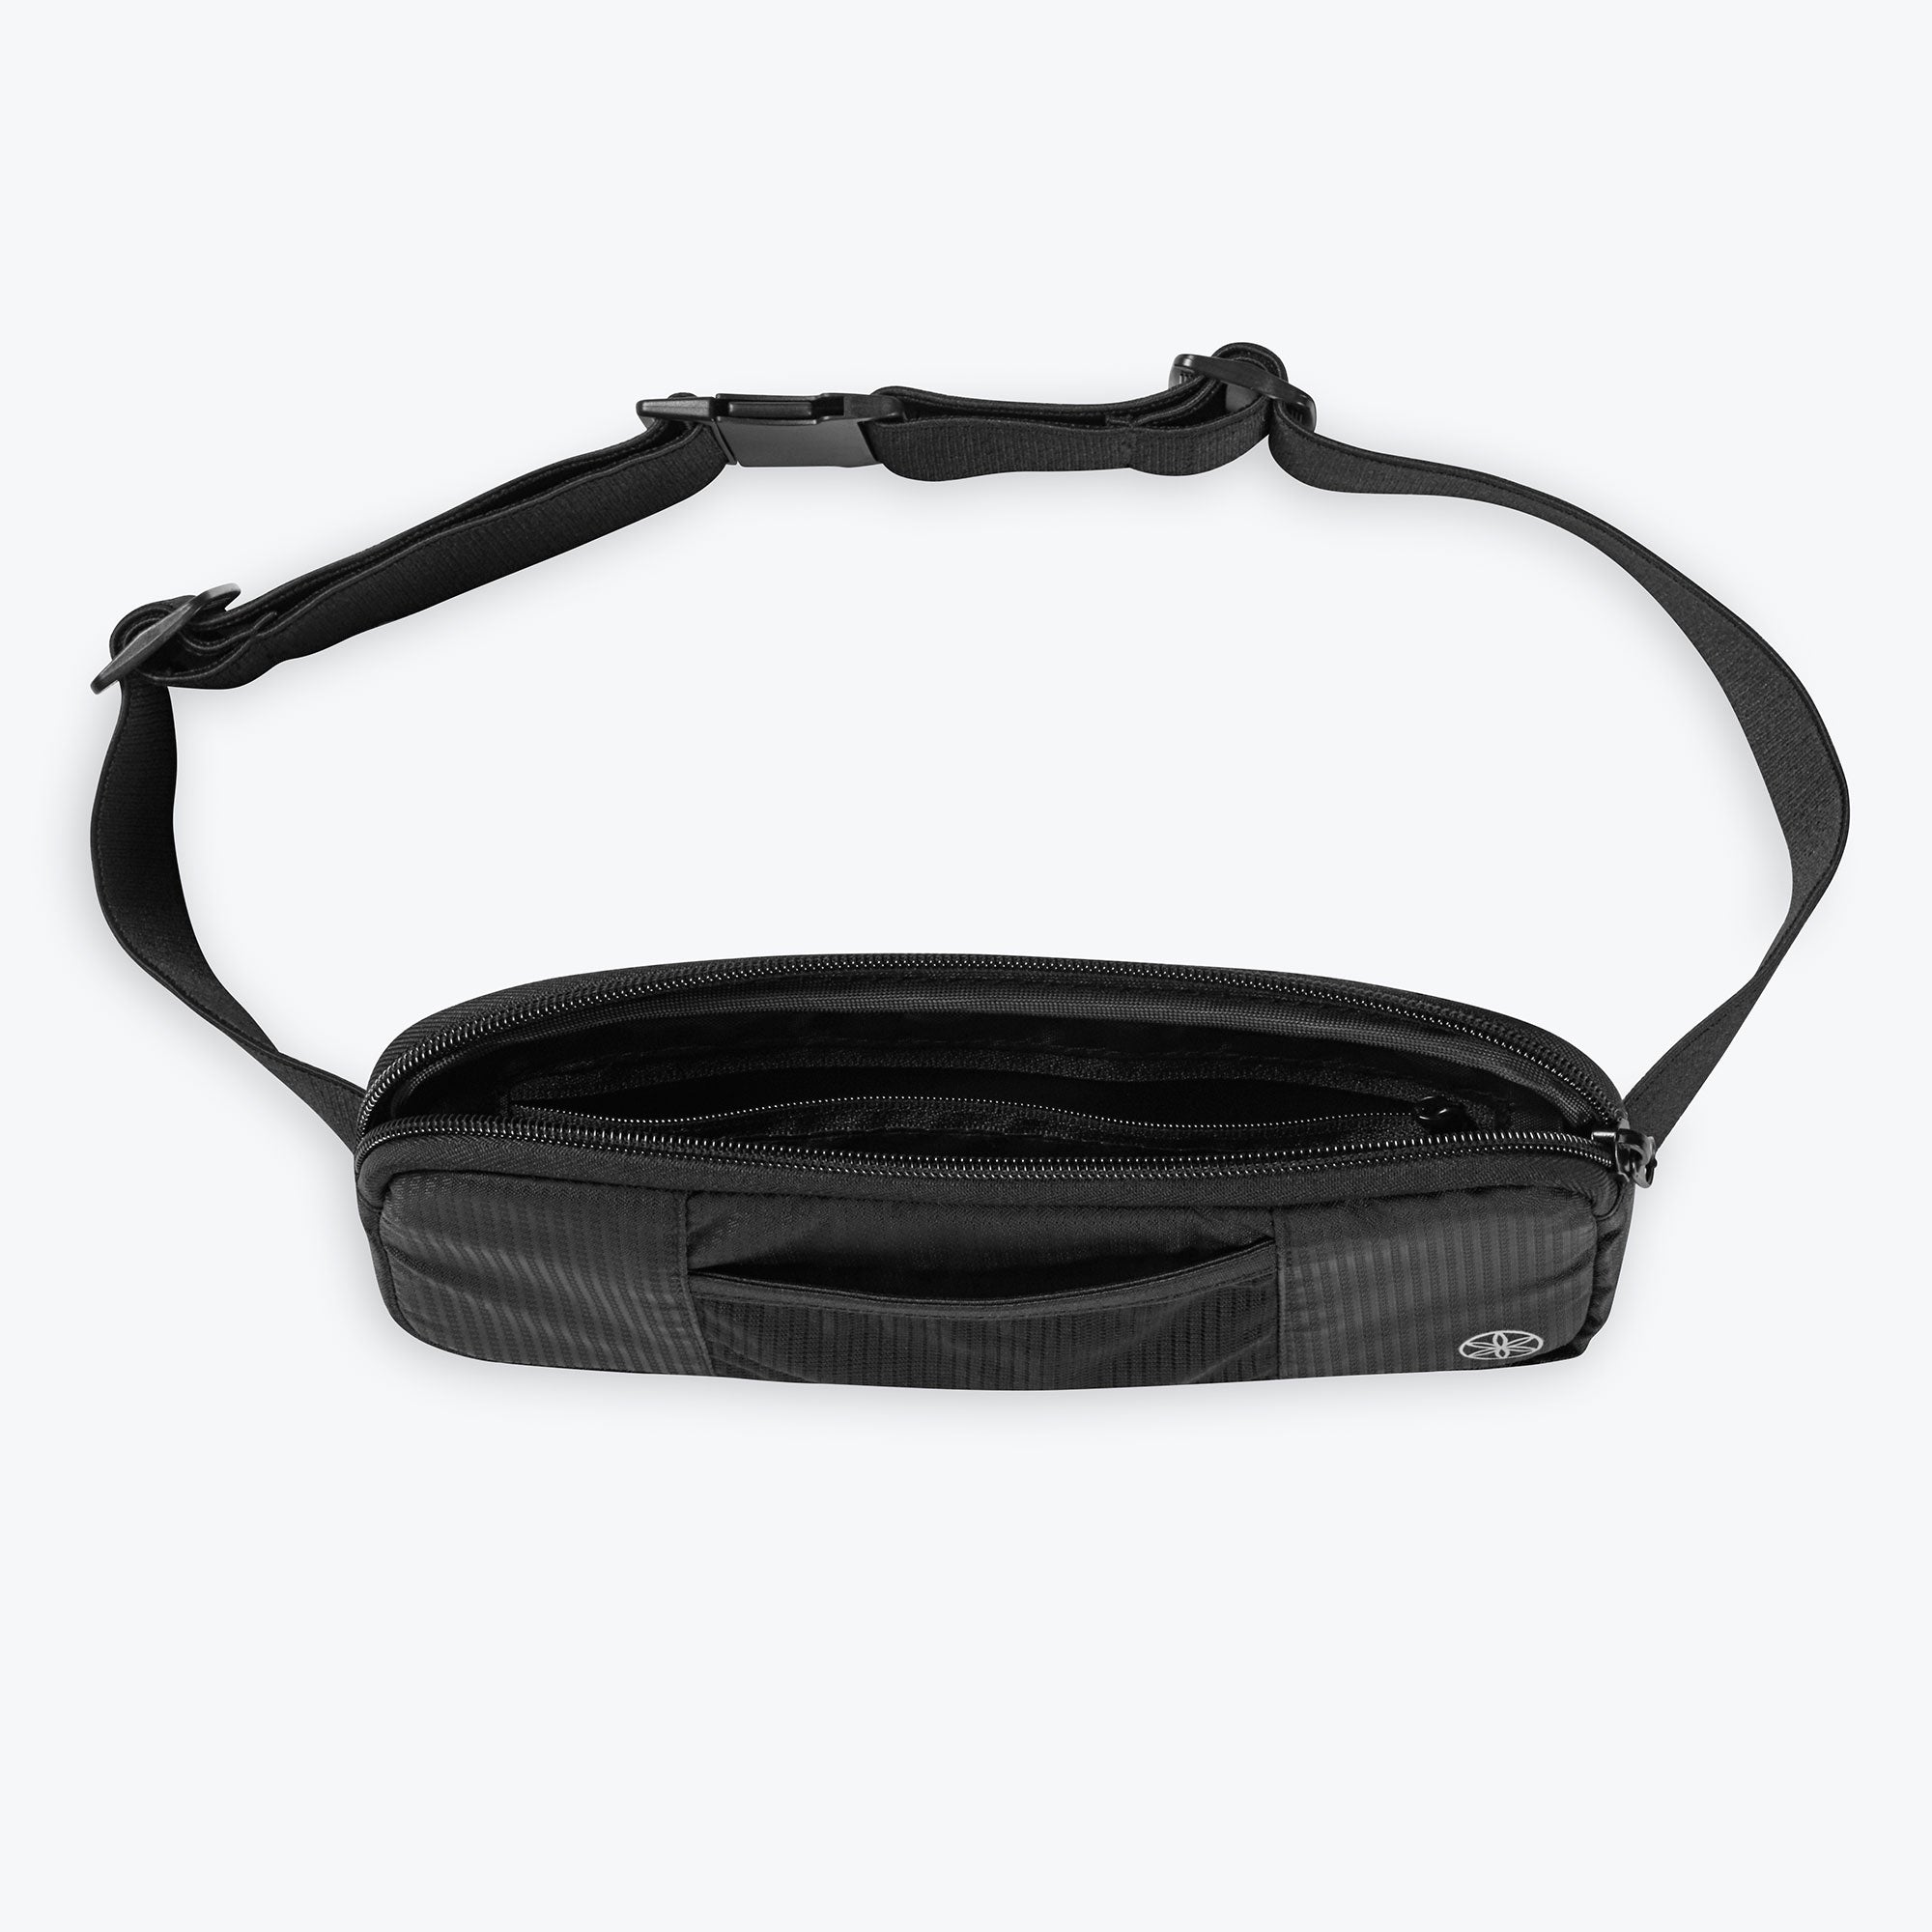 Gaiam Sidekick Waist Pack - Storage Belt Bag for Women And Men - Adjustable  Belt With Lightweight Pouch For The Gym & Studio